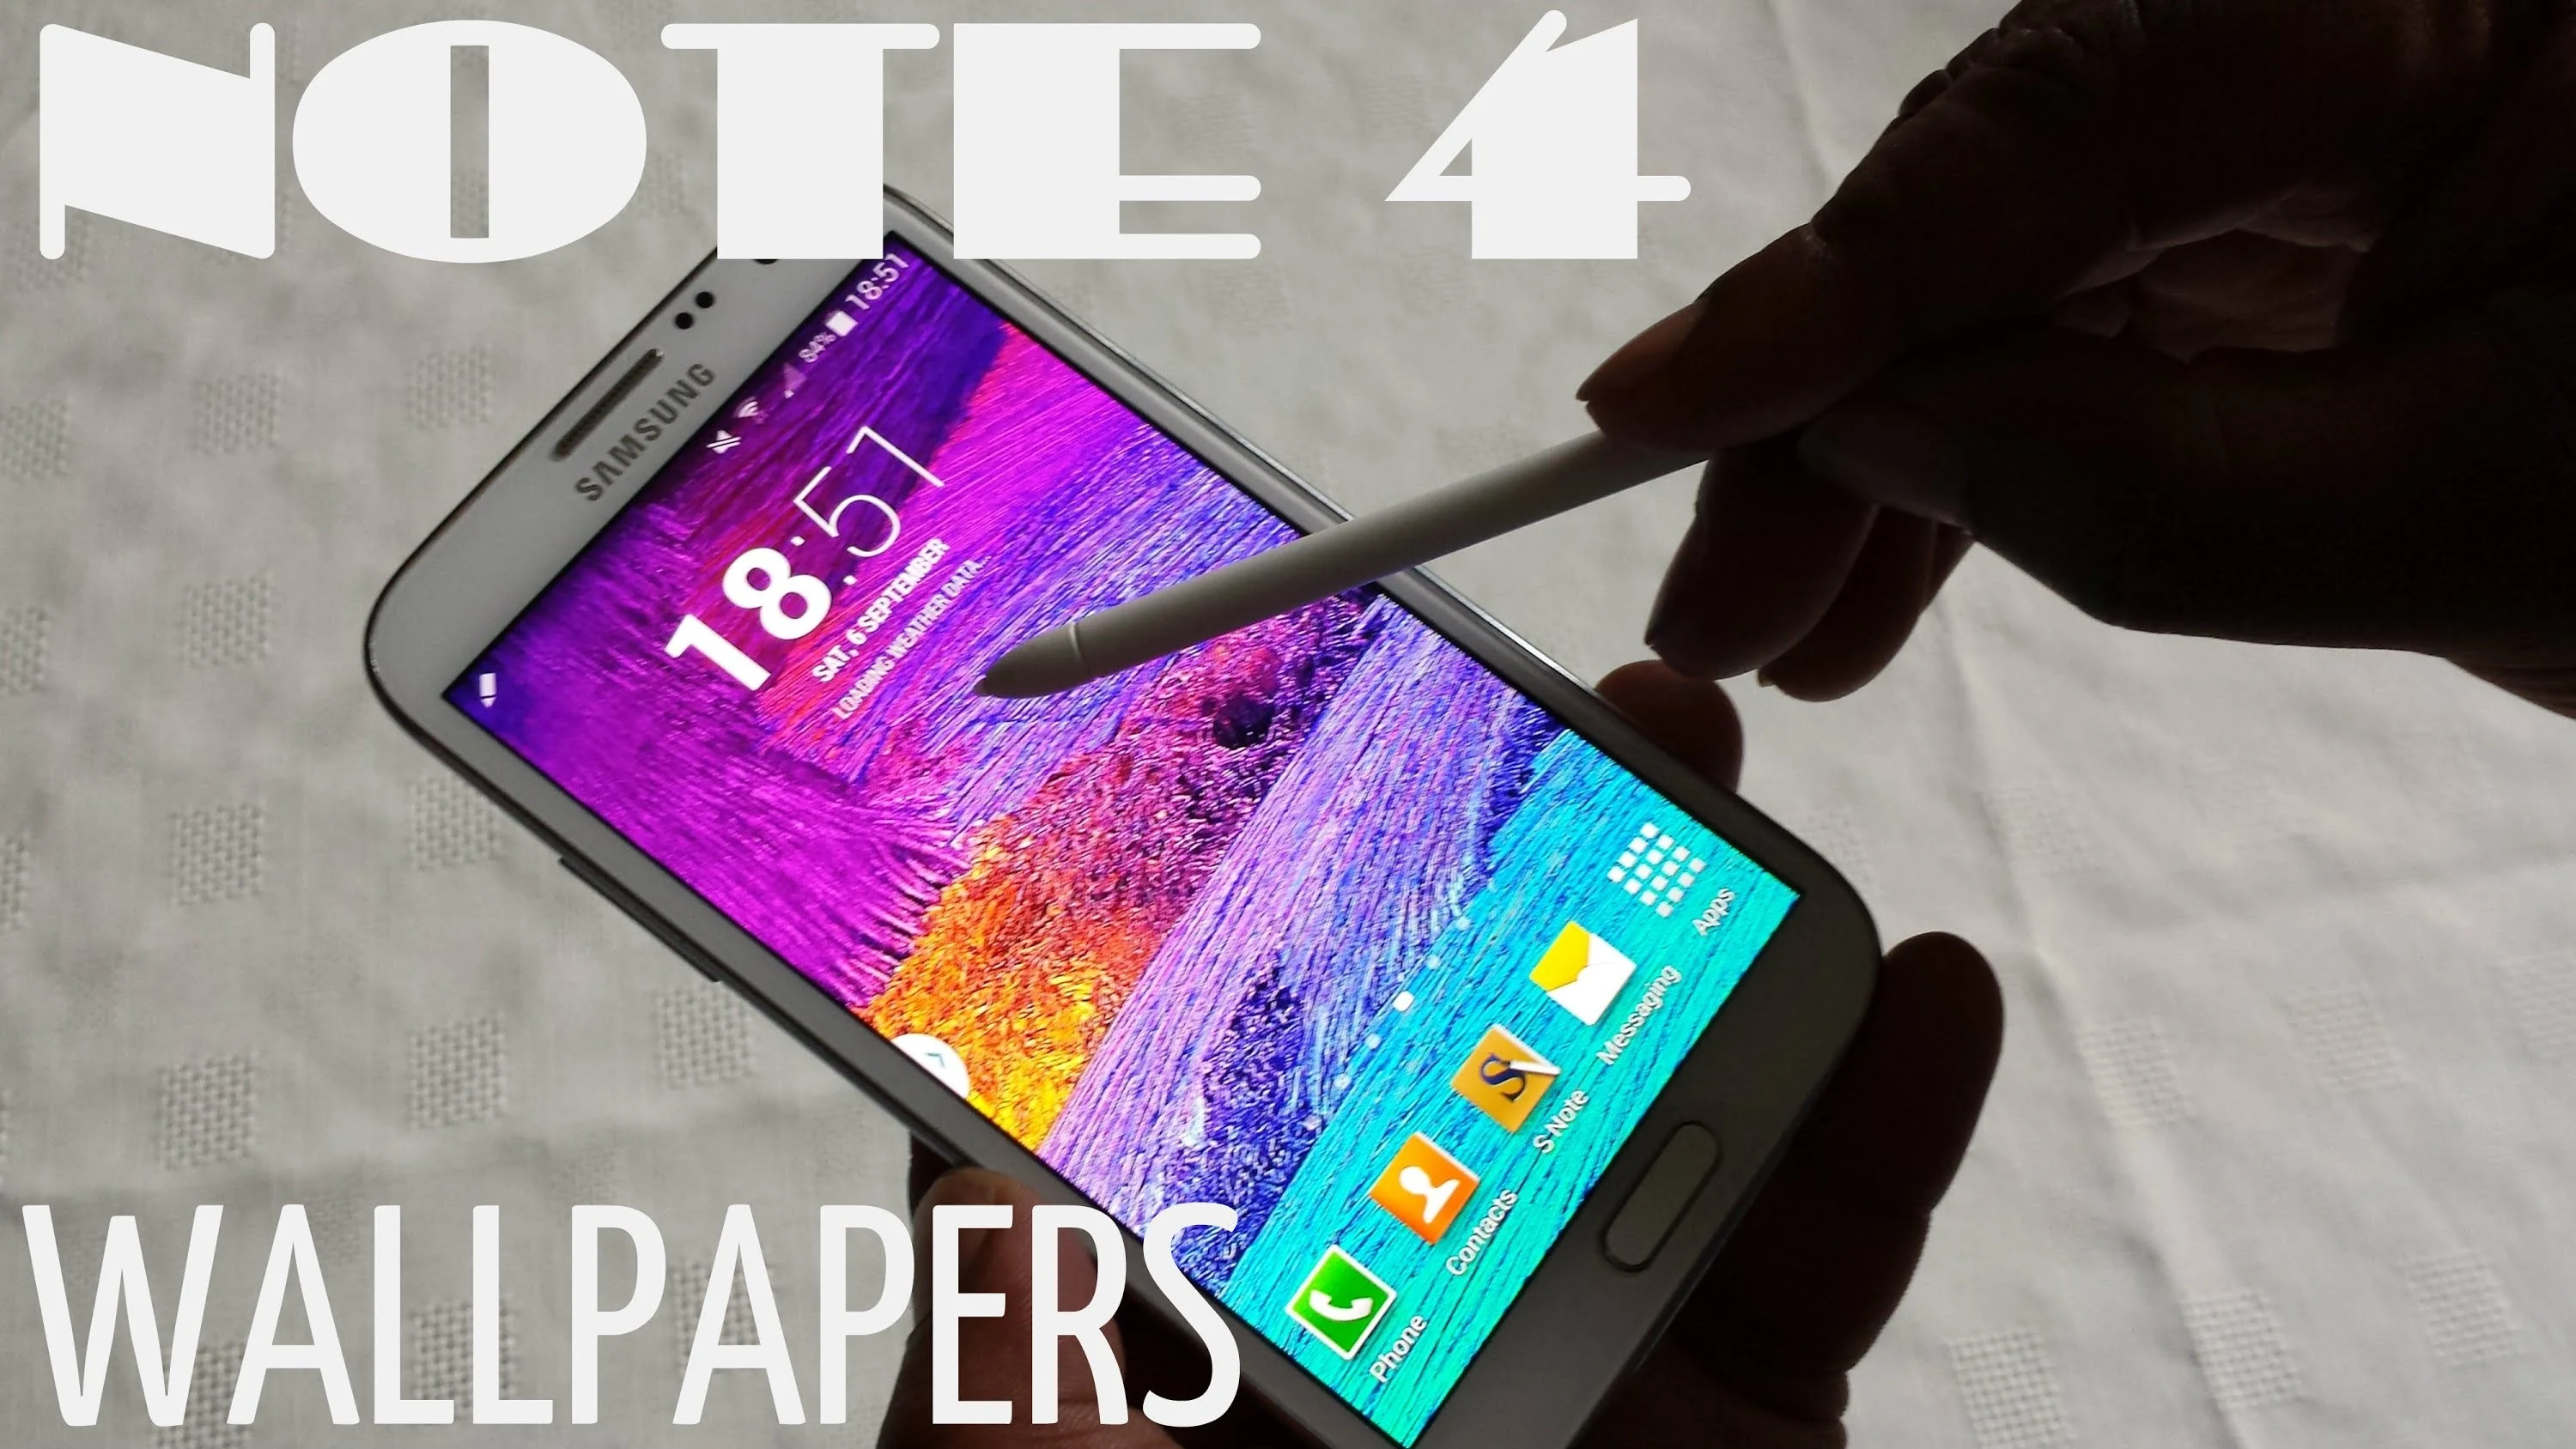 Samsung Galaxy Note 4 STOCK WALLPAPERS 1ST LOOK